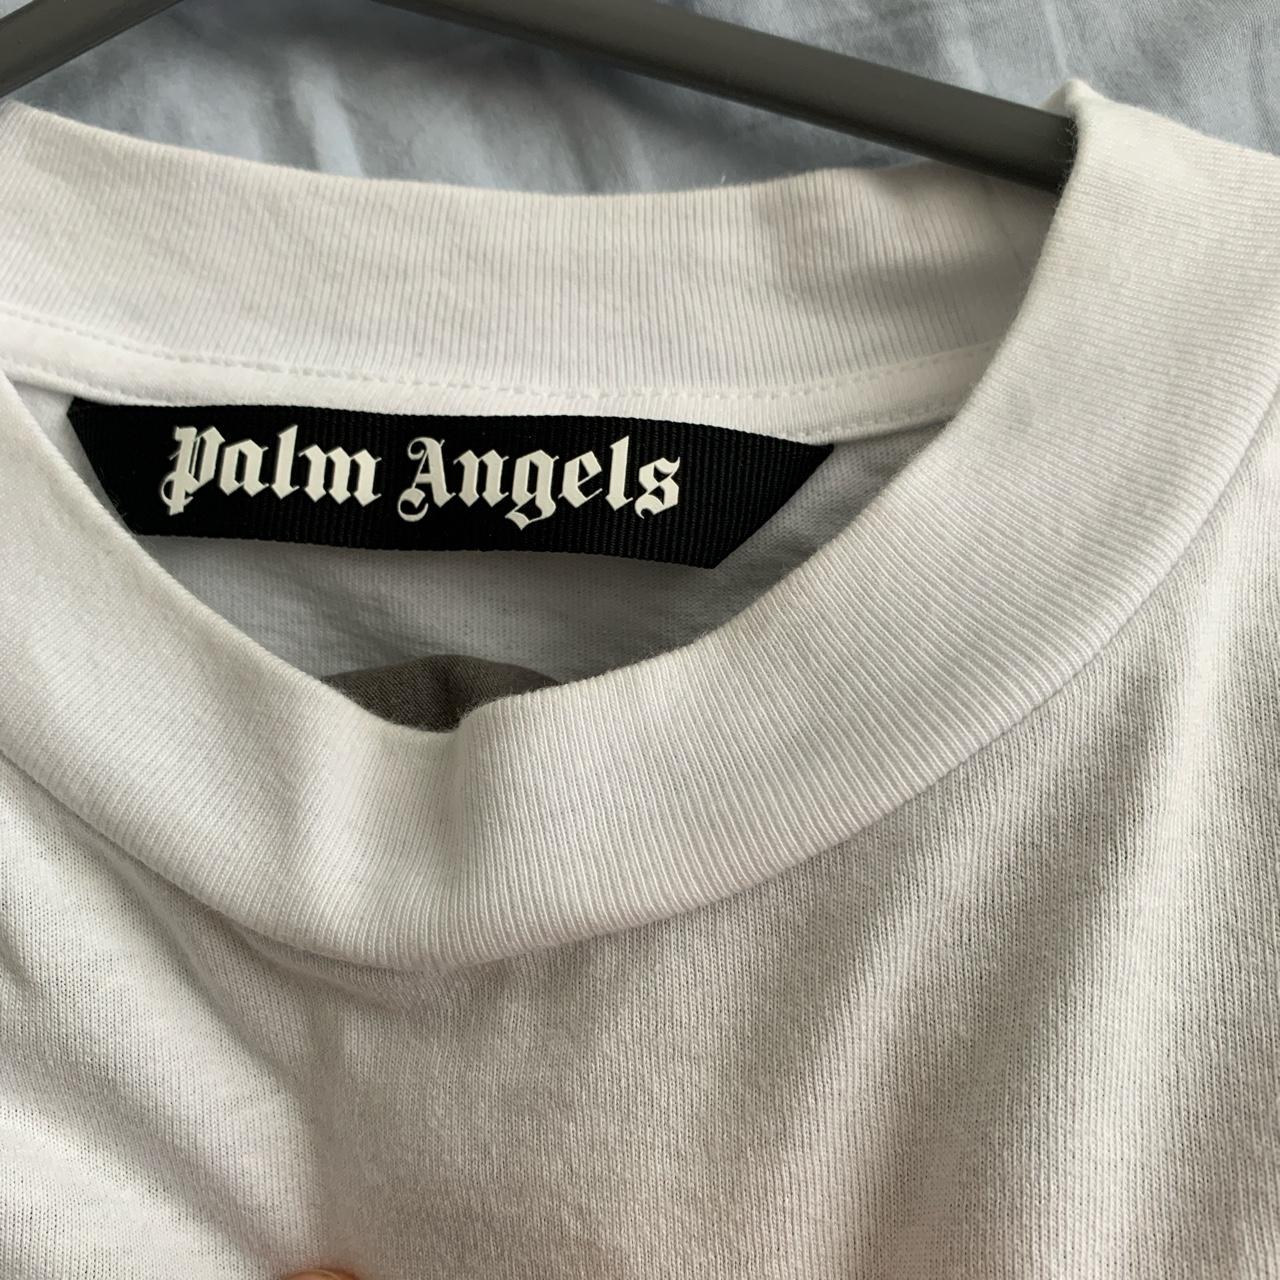 Limited Edition Palm Angels T Shirt!! Sold out in... - Depop